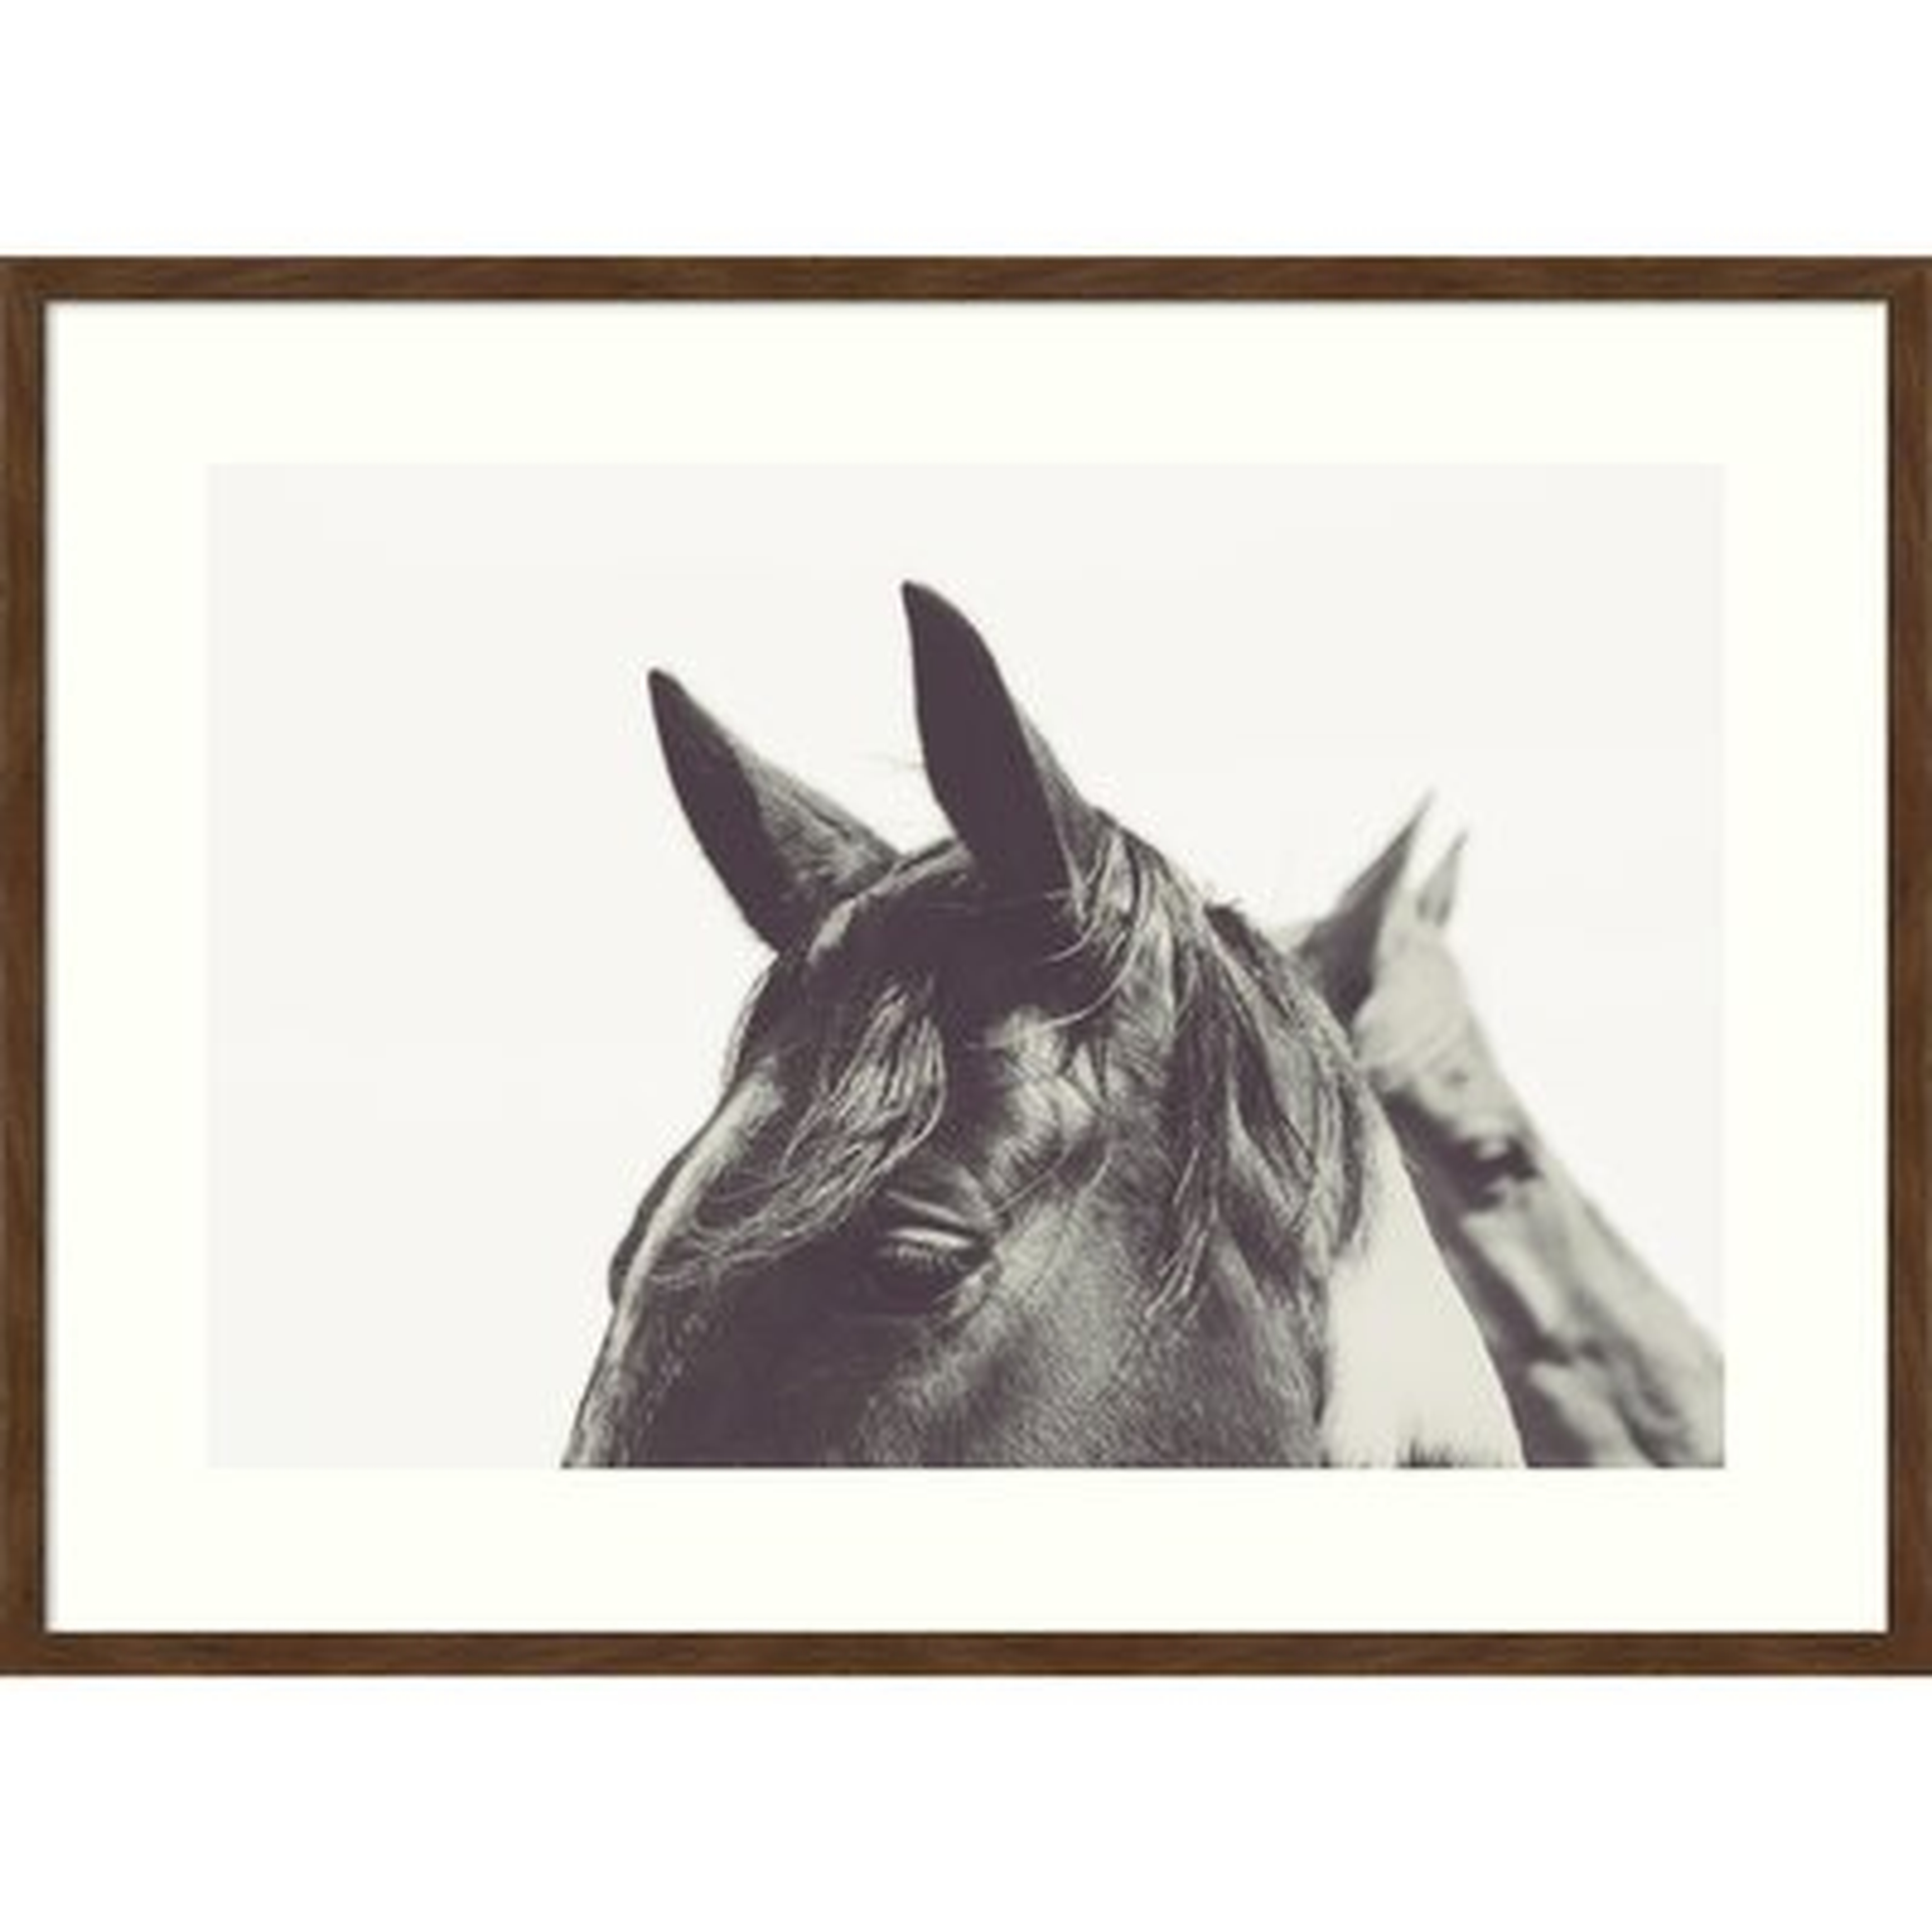 Partner by Emi And Mark Franzen - Picture Frame Photograph Print on Paper - Wayfair